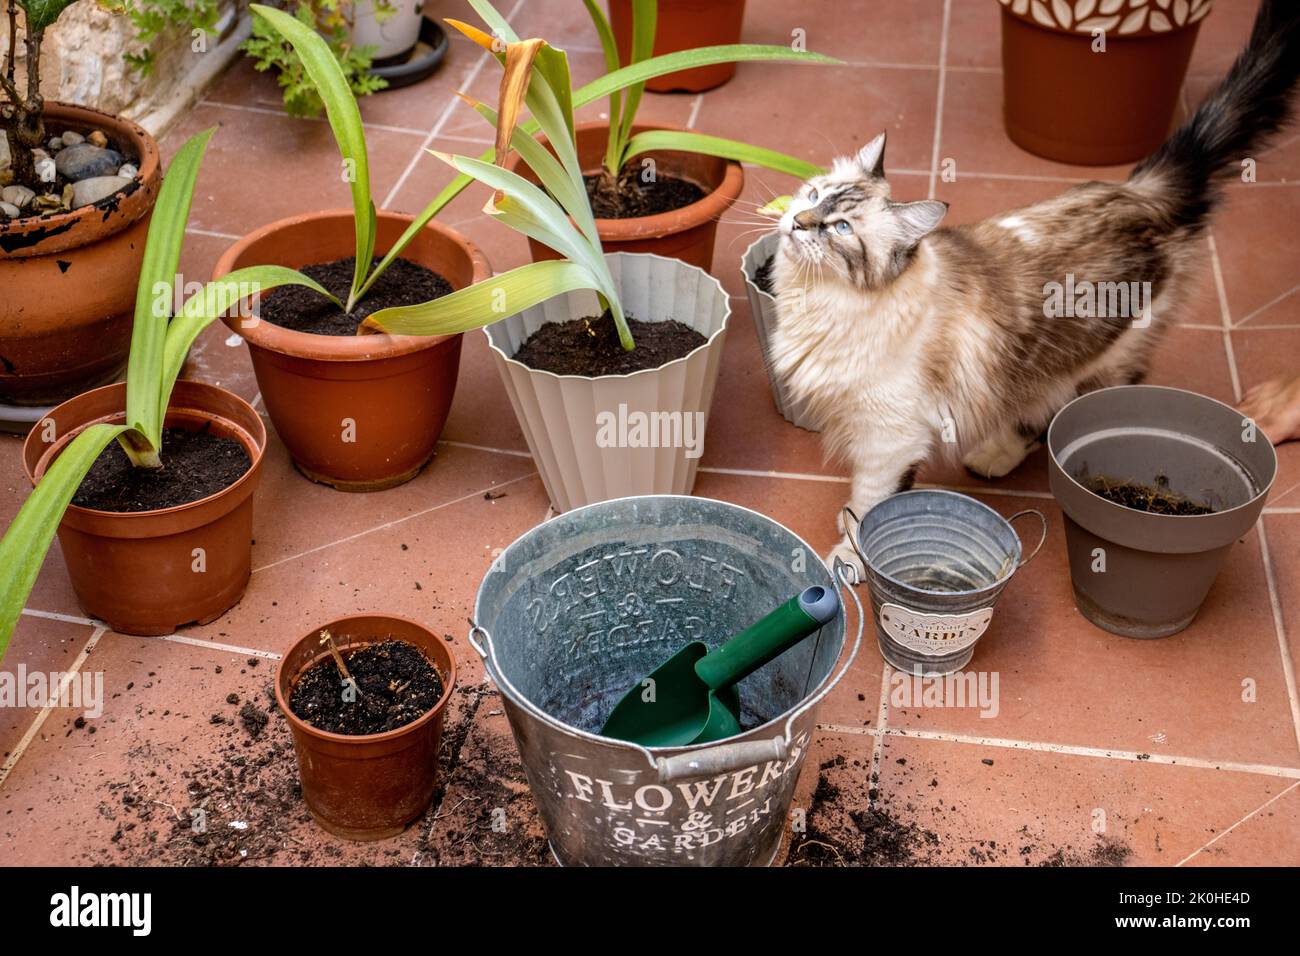 Home gardening scene. gardening tools and soil for planting. Toxic plants for cats. Gardening concept. Stock Photo